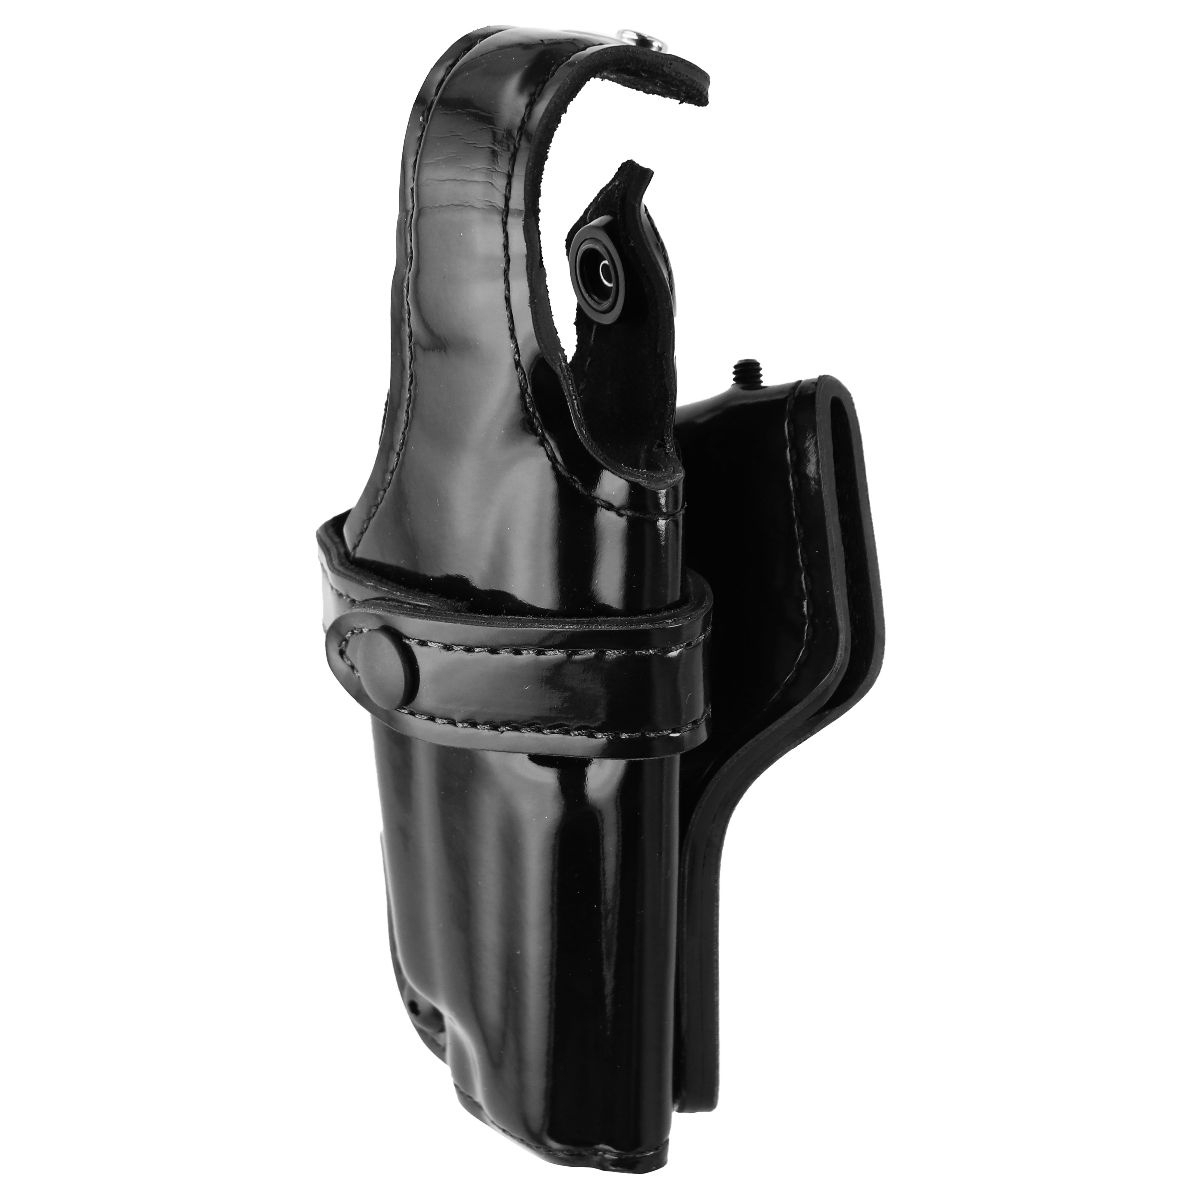 Safariland Right Hand Holster - Black Gloss (070) 319 / P-226 After